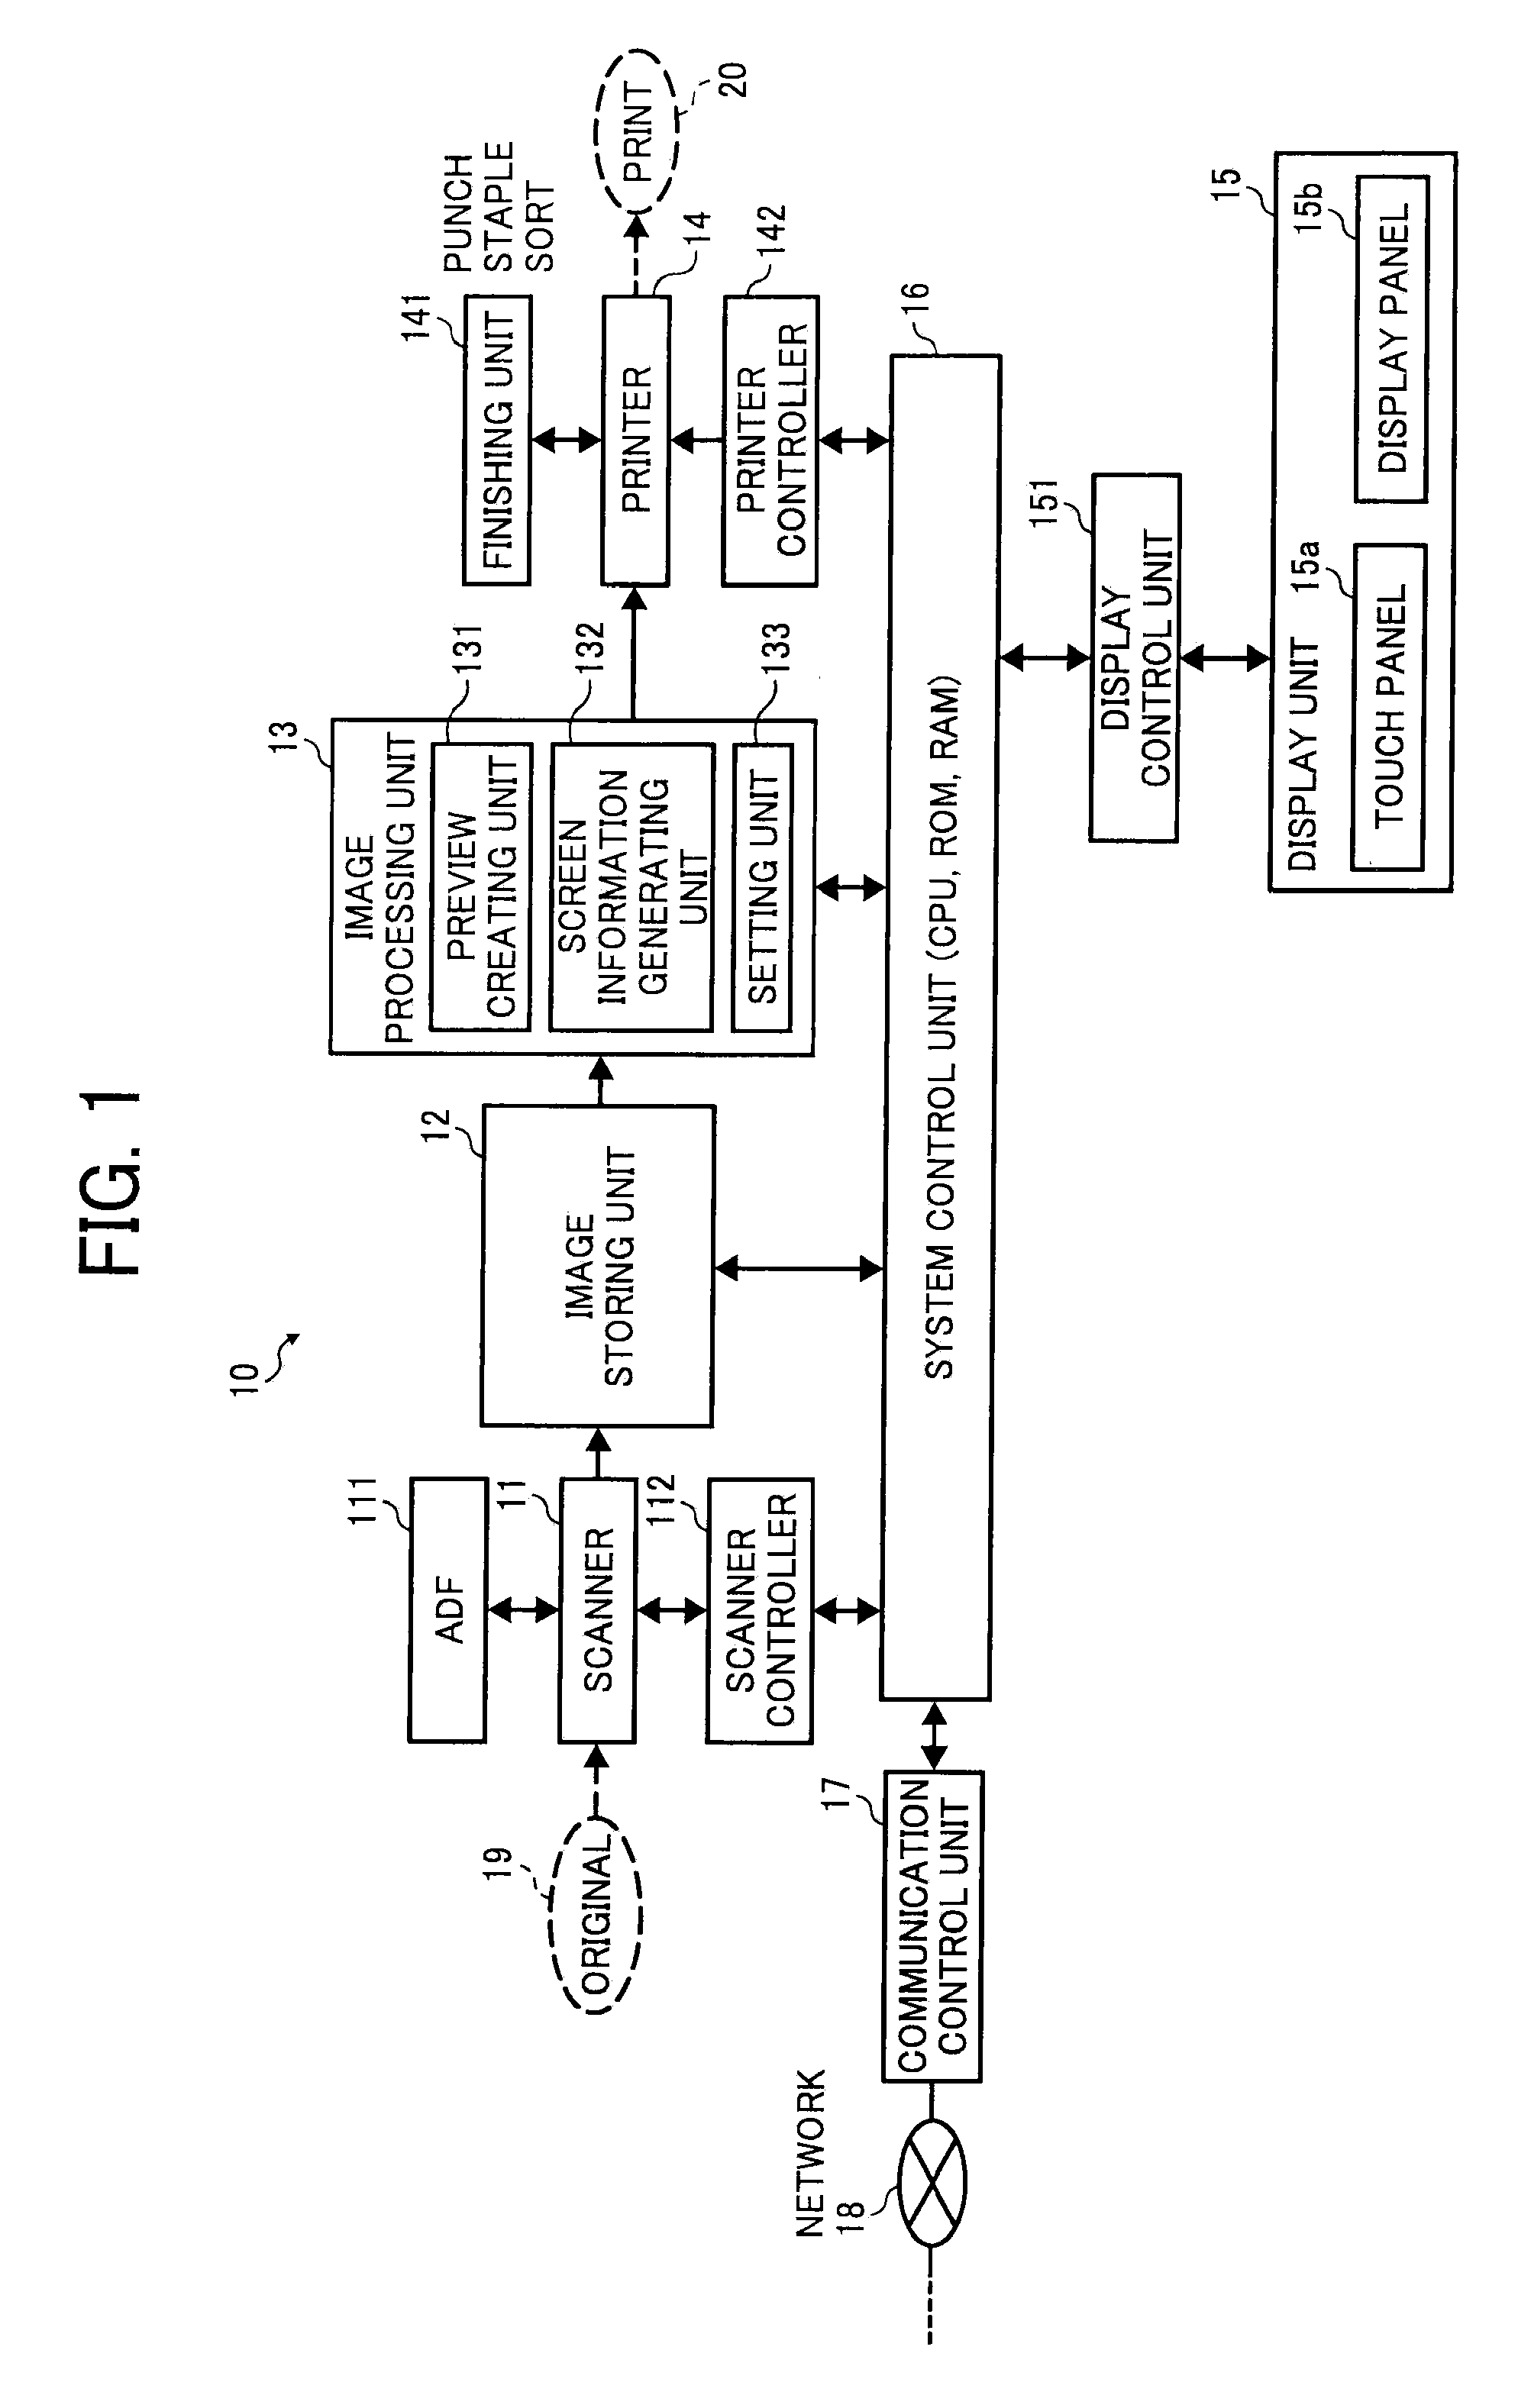 Image processing apparatus, image forming apparatus, and computer program product